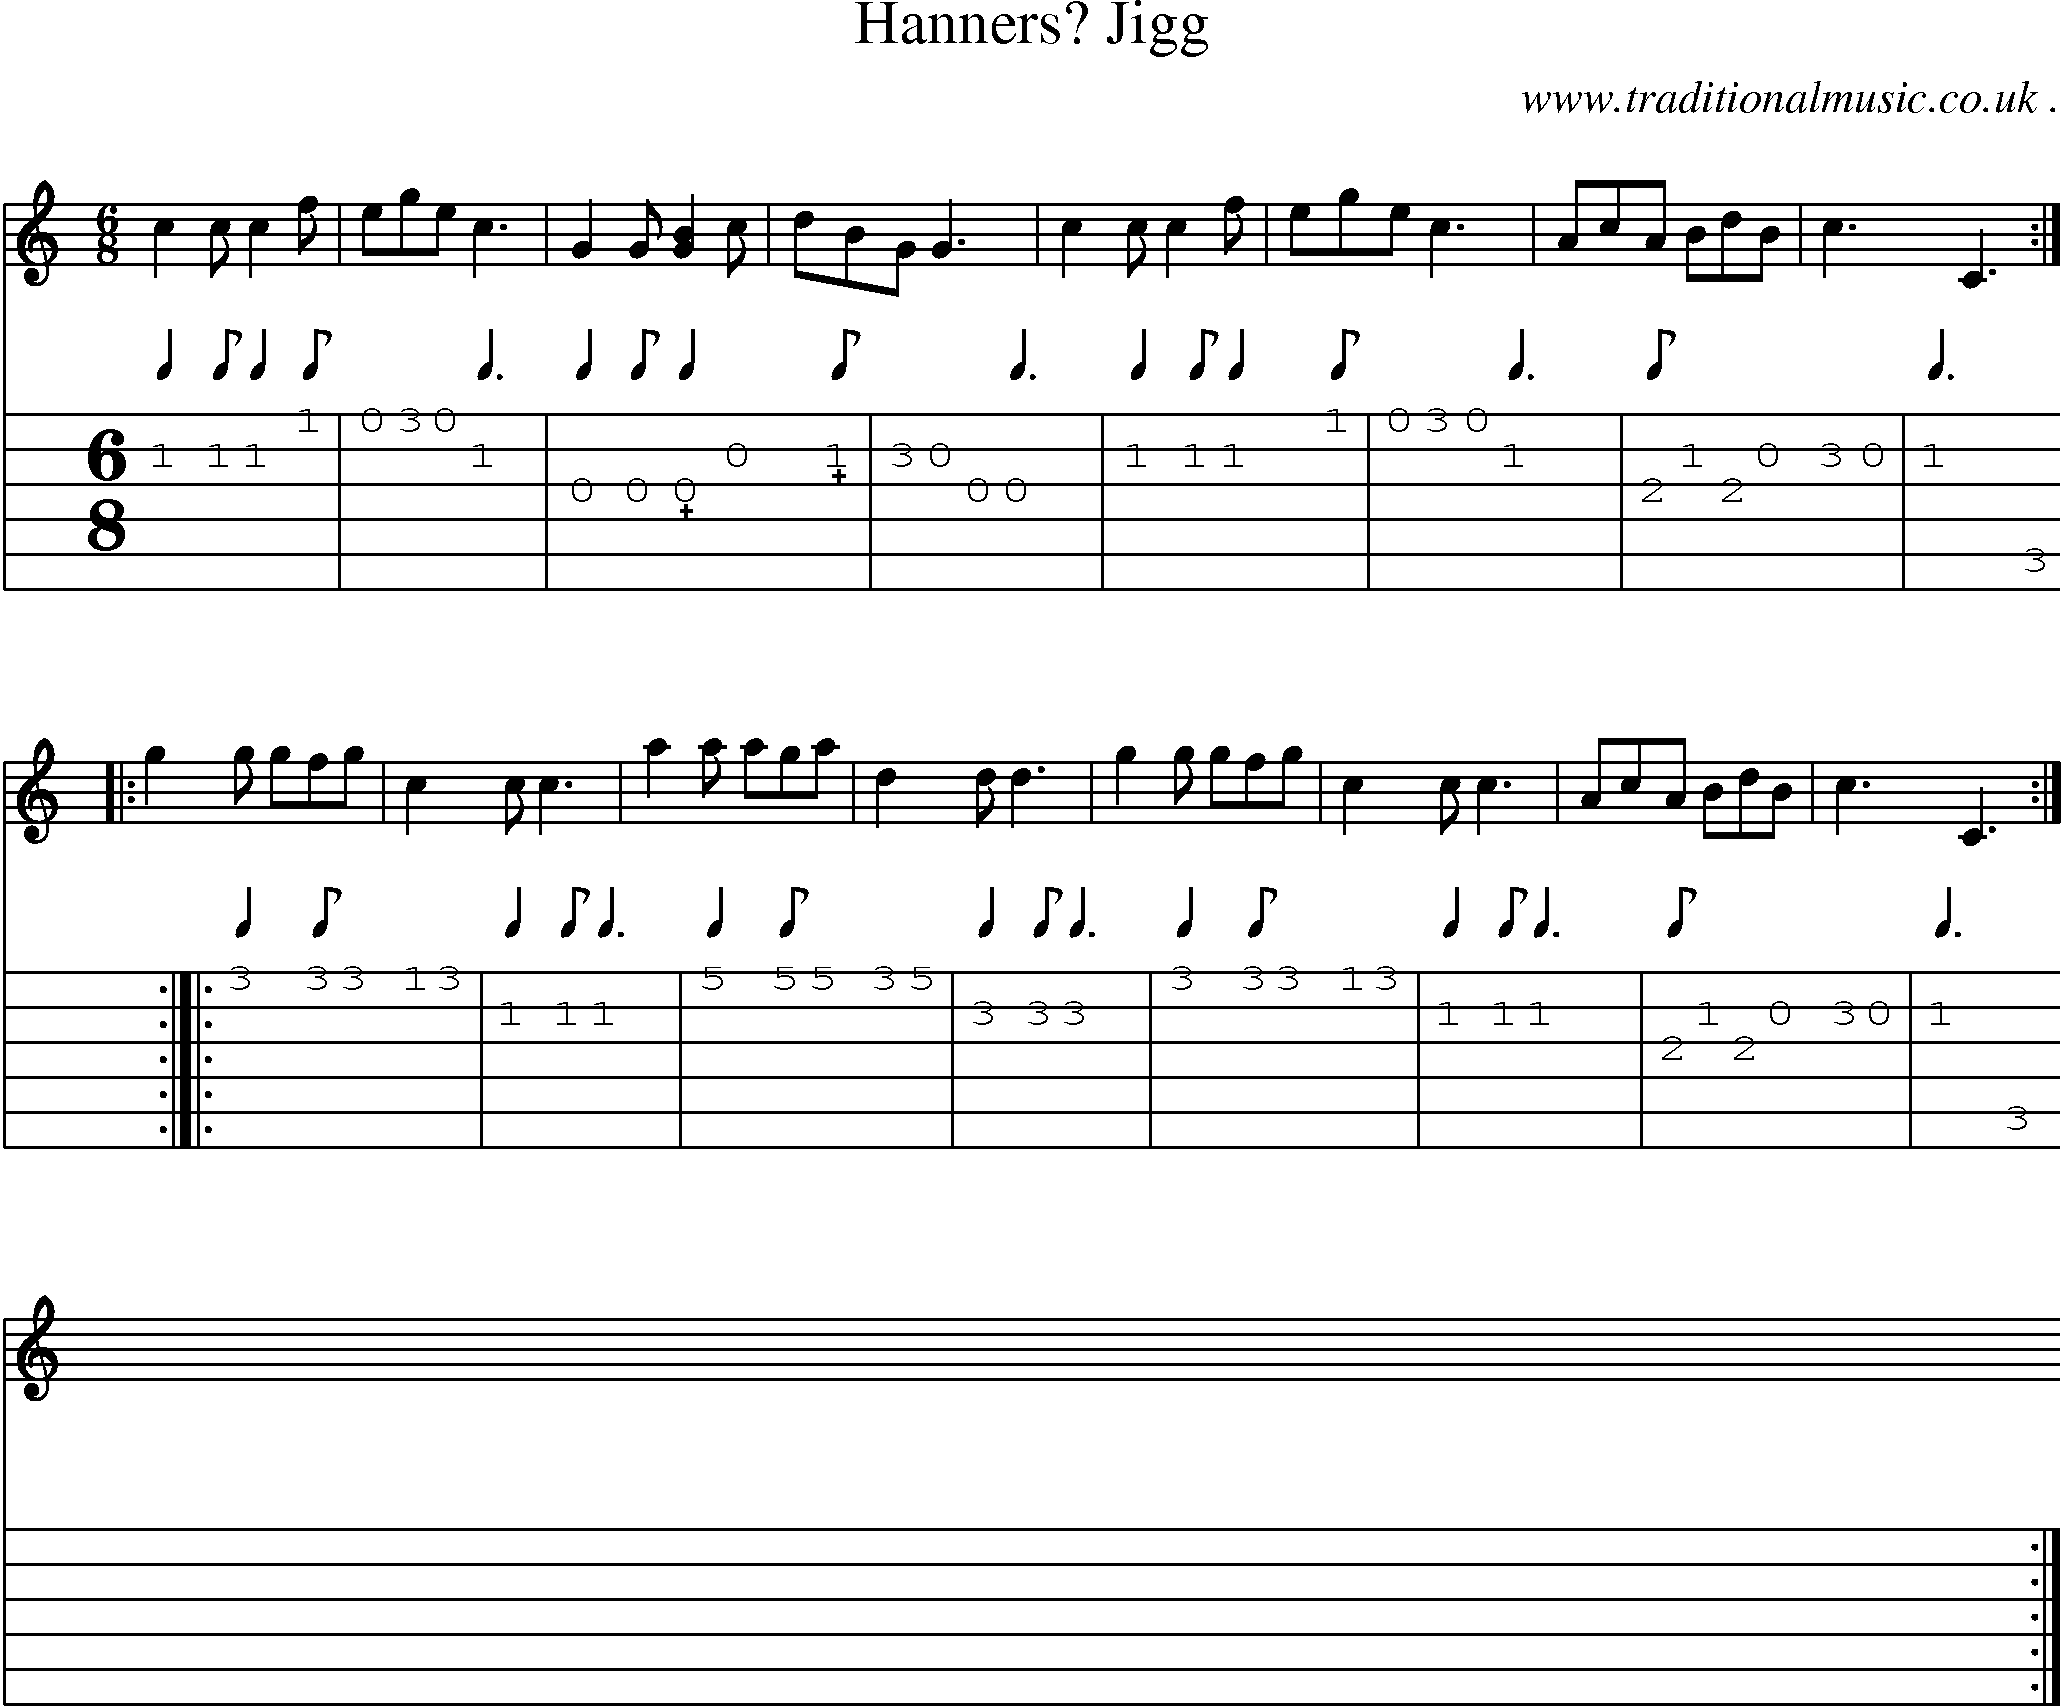 Sheet-Music and Guitar Tabs for Hanners Jigg